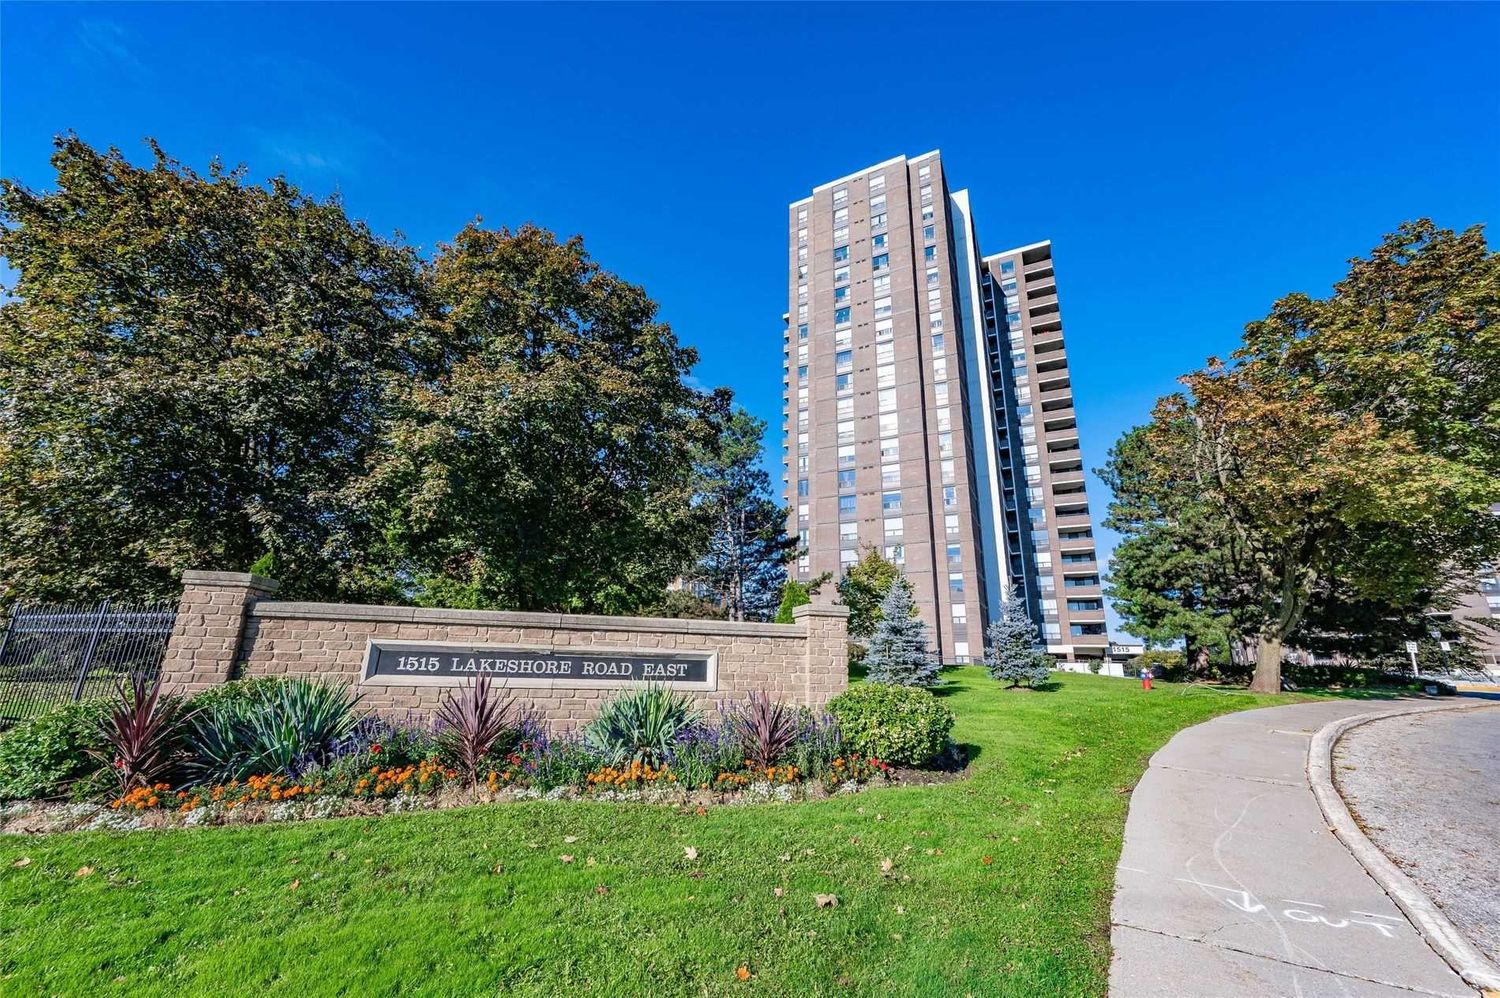 1515 Lakeshore Road E. 1515 Lakeshore Road East Condos is located in  Mississauga, Toronto - image #1 of 3